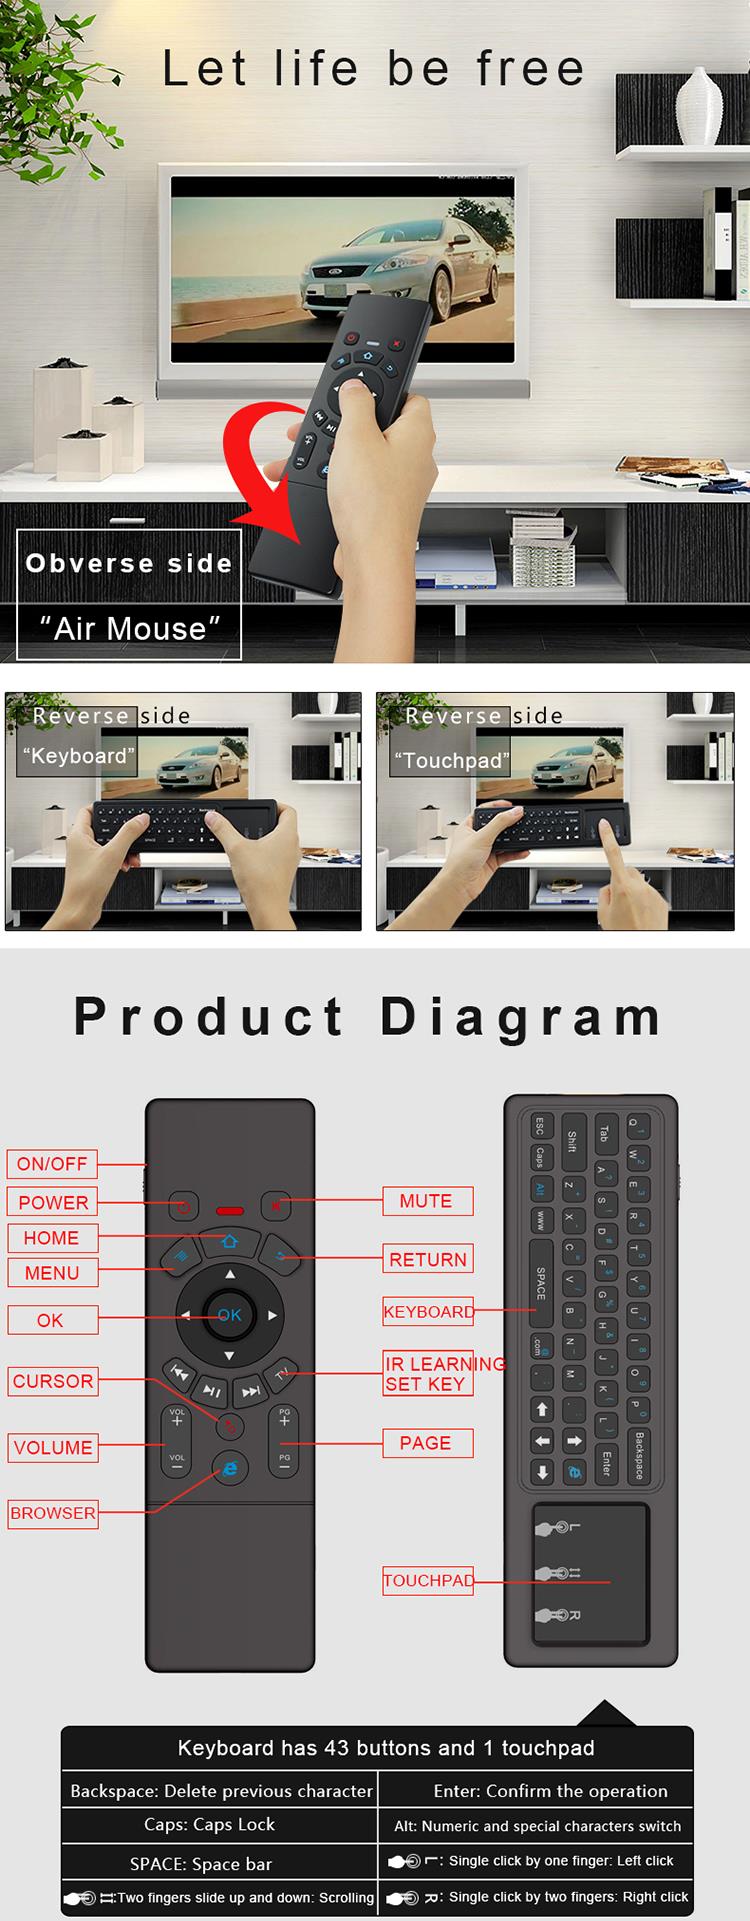 T6 2.4G Wireless Air Mouse Keyboard With Touchpad IR Learning For Android TV Box/Xbox/PC/Smart TV 5